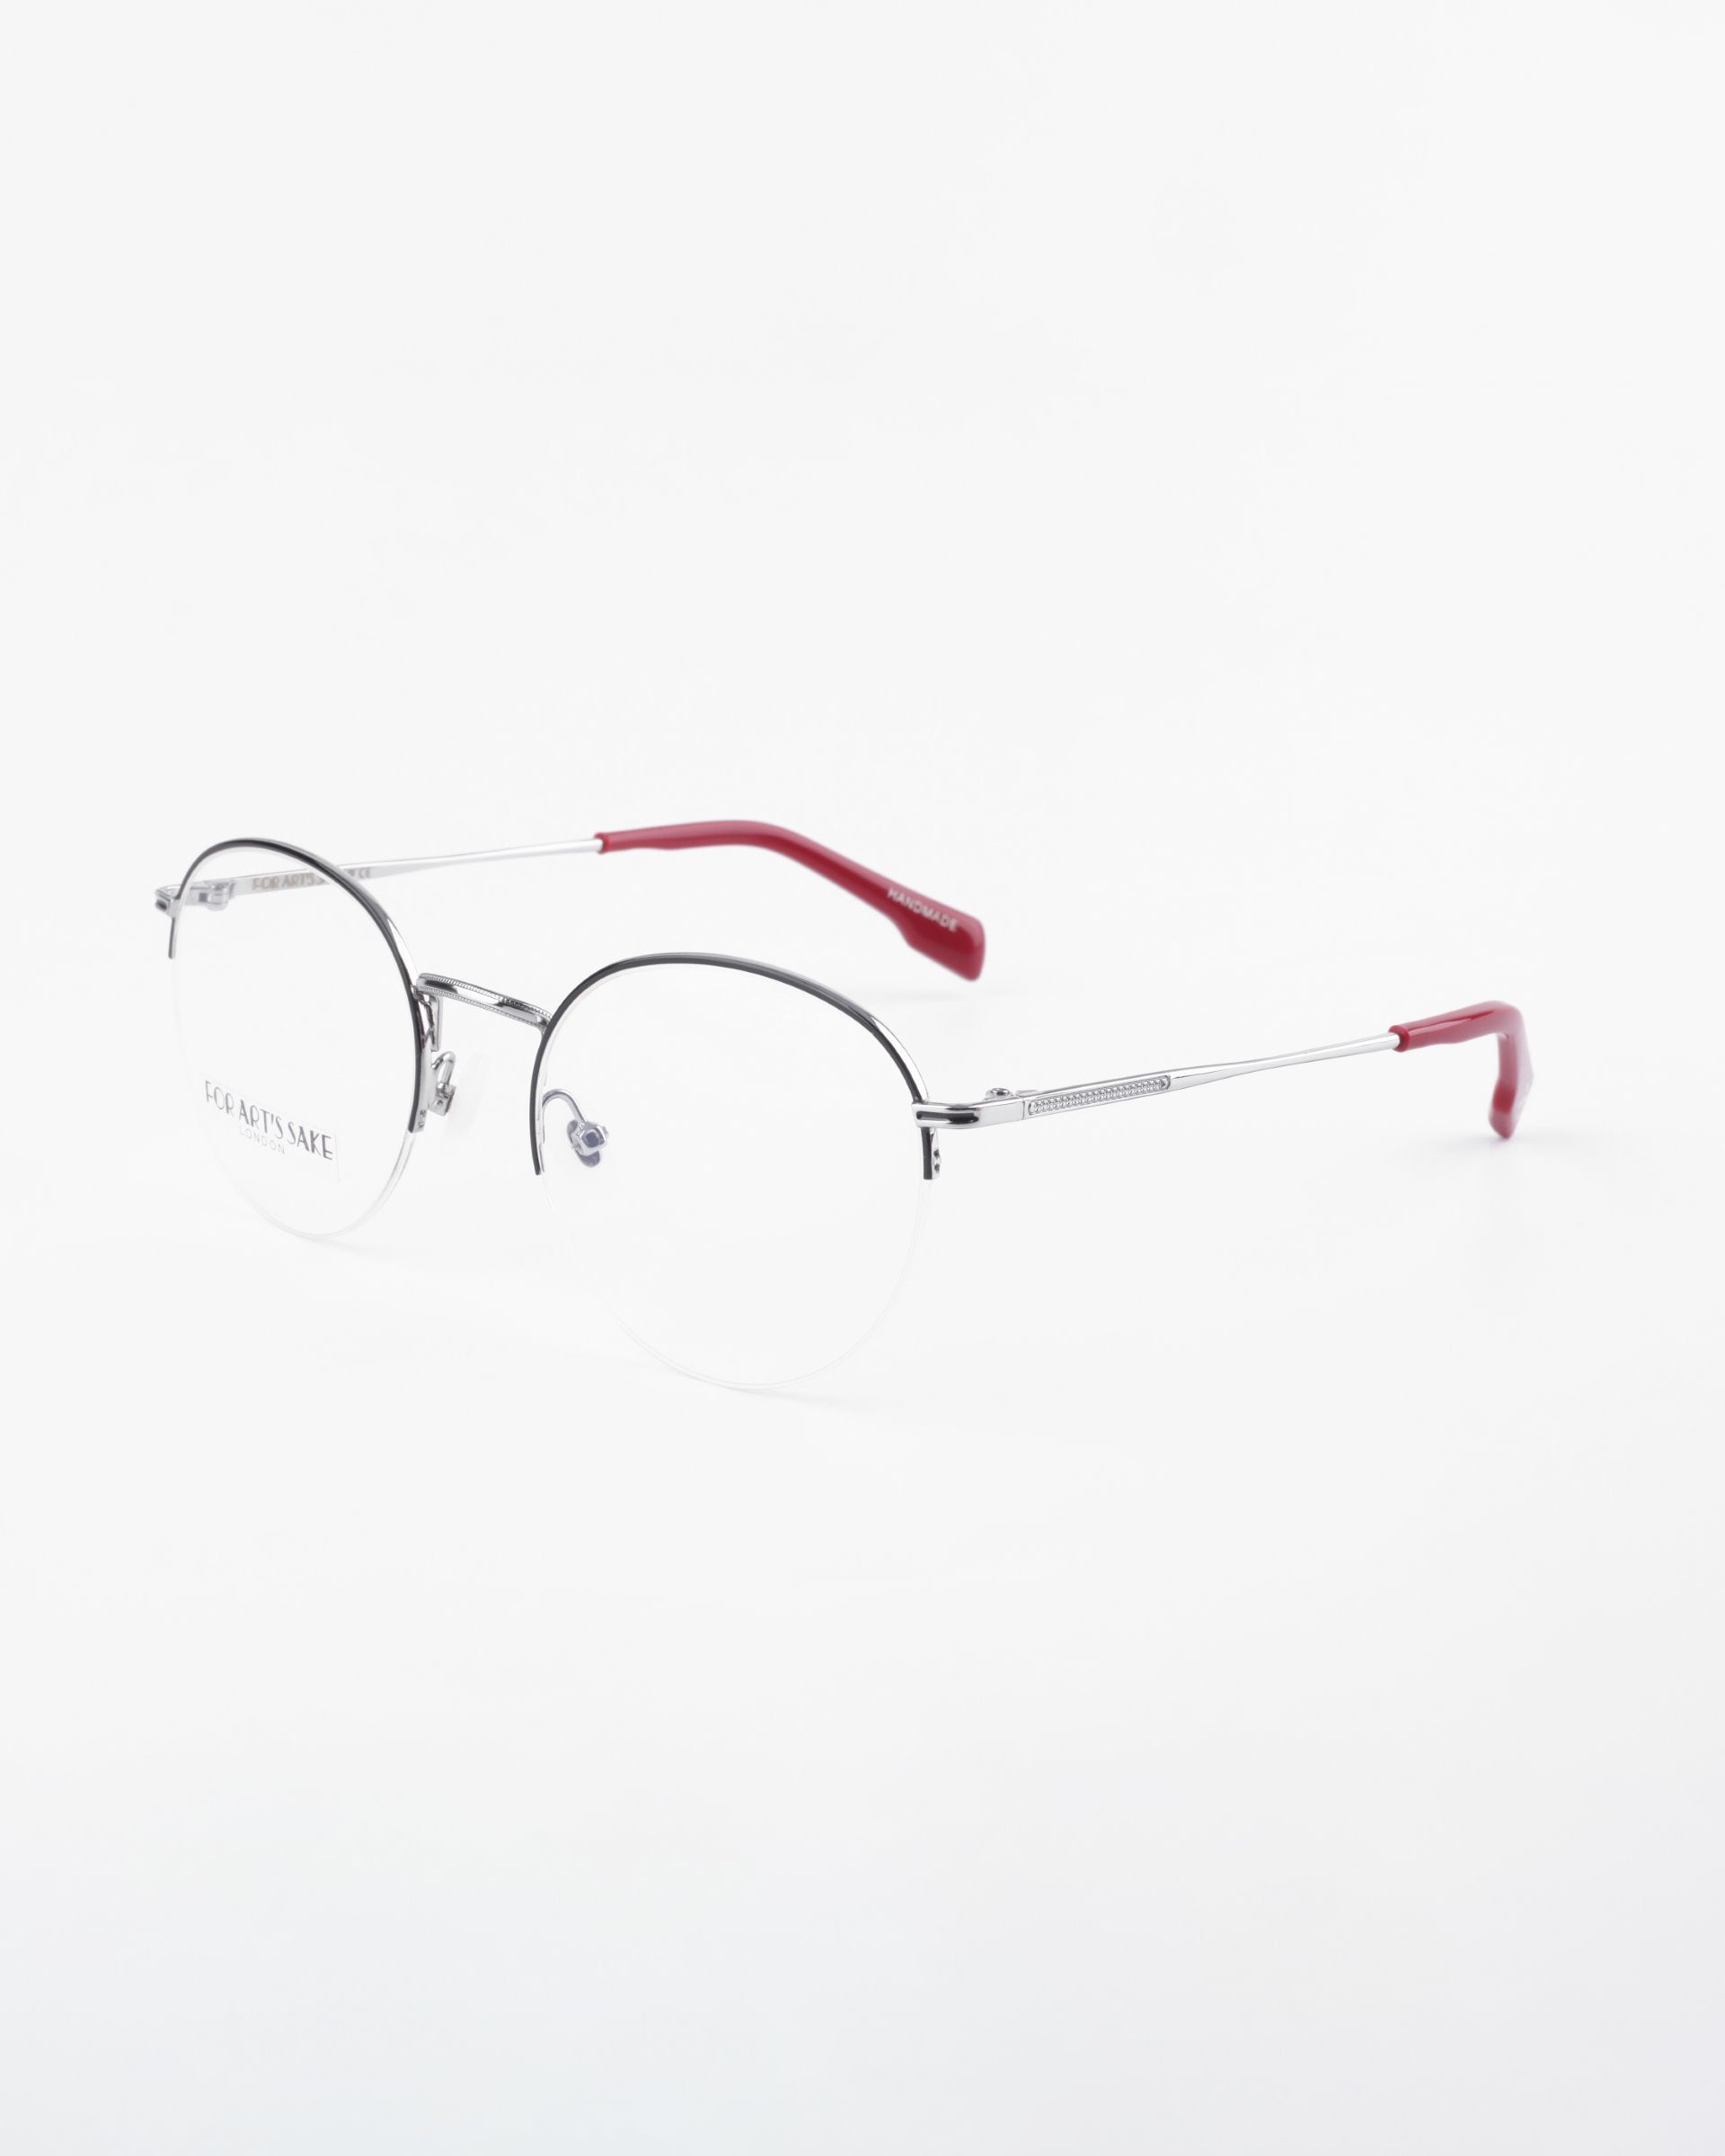 A pair of Ivy by For Art's Sake® with thin, silver metal frames and red earpieces. The design is minimalistic and modern, featuring adjustable nose pads for comfort and prescription lenses with a blue light filter. The brand's name is subtly visible on one side of the frame, set against a white background.